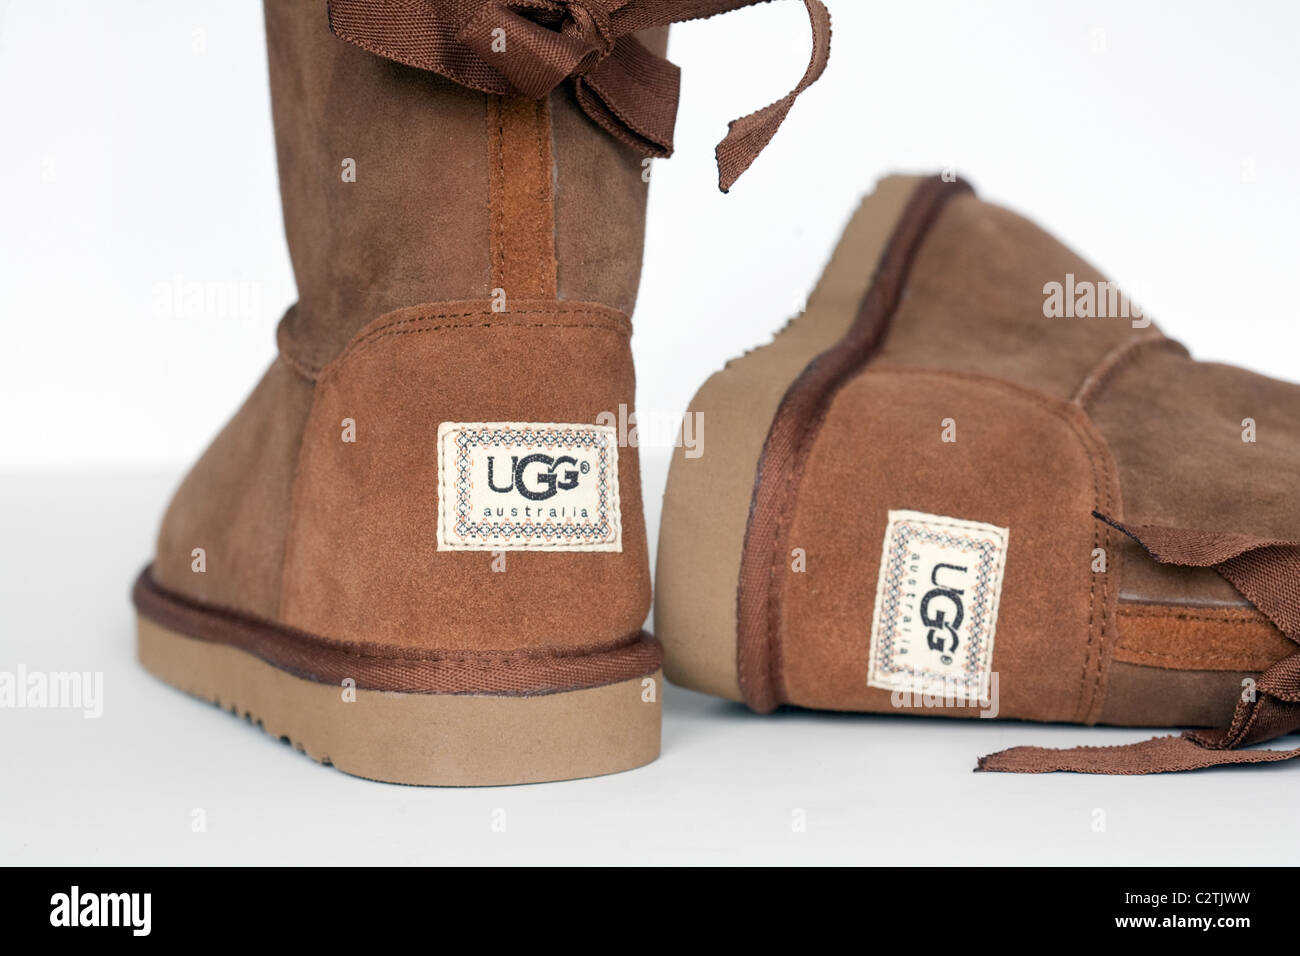 ugg boots in china